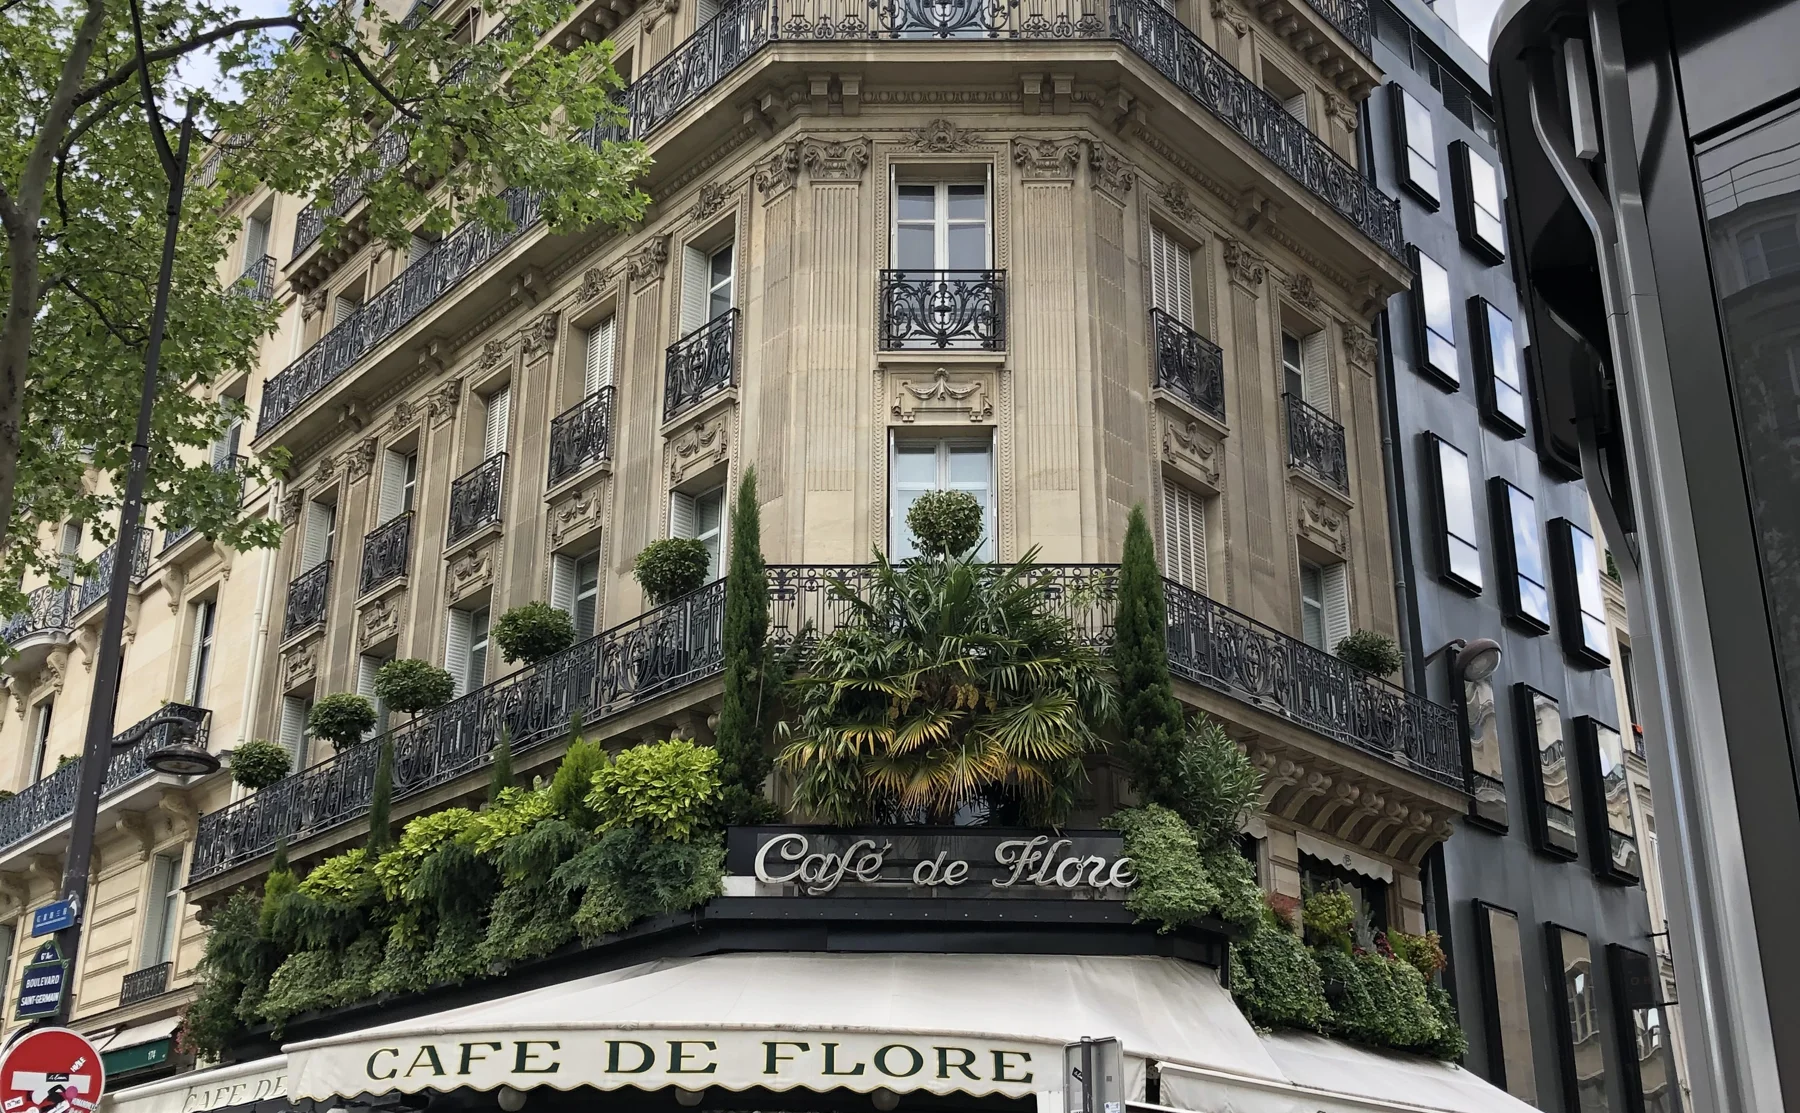 Indulge in a Chocolate and Pastry Tour in Saint-Germain - 1500940